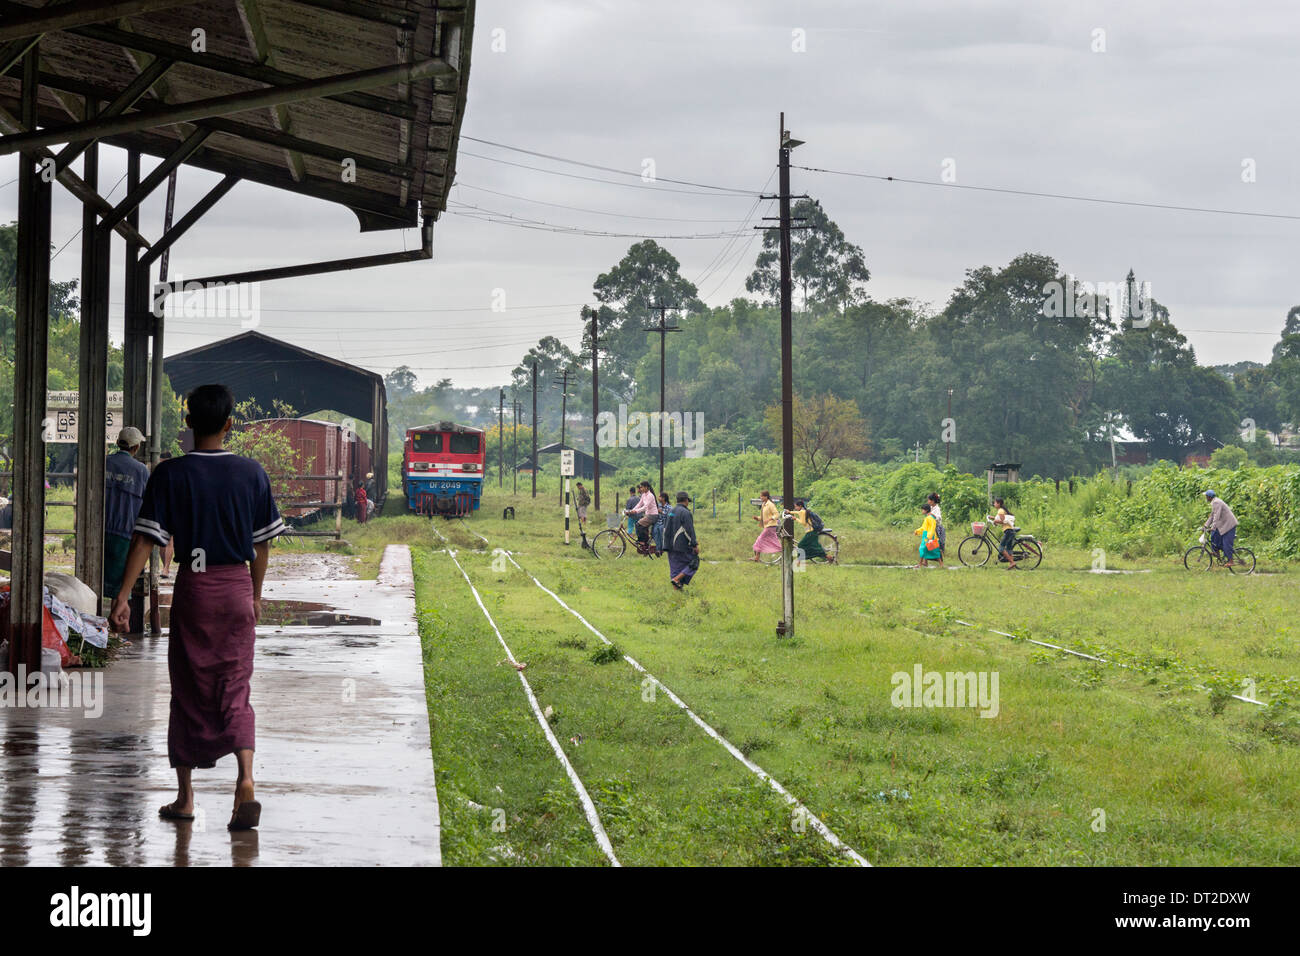 Locals hurrying across the tracks in front of the Mandalay to Pyin Oo Lwin train, Mandalay railway station, Myanmar Stock Photo